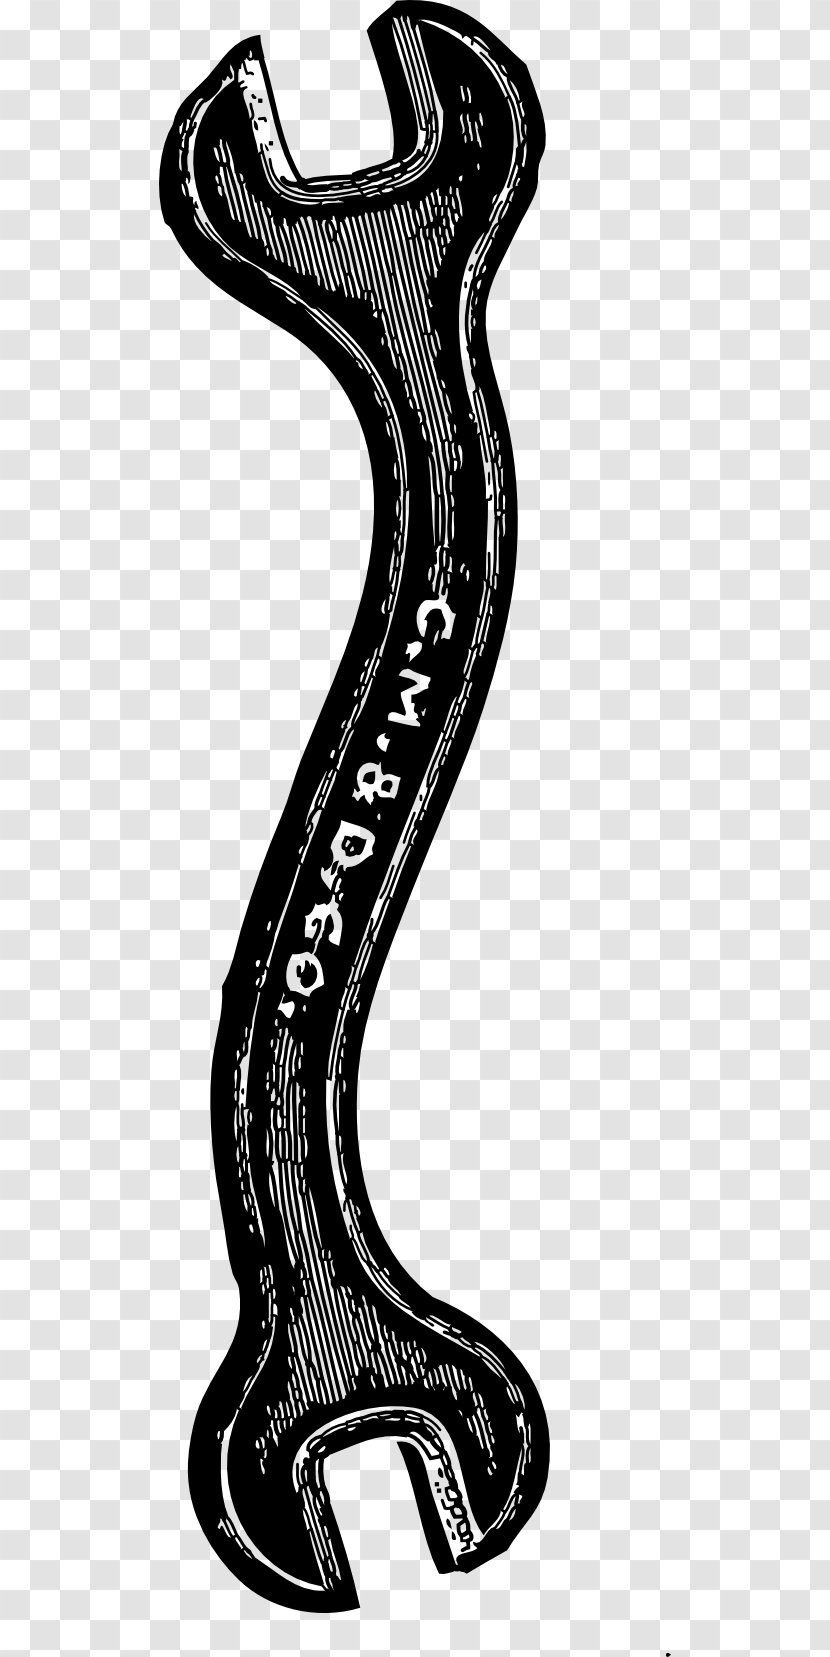 Spanners Tool Pipe Wrench Clip Art - Monochrome - Adjustable Spanner Transparent PNG